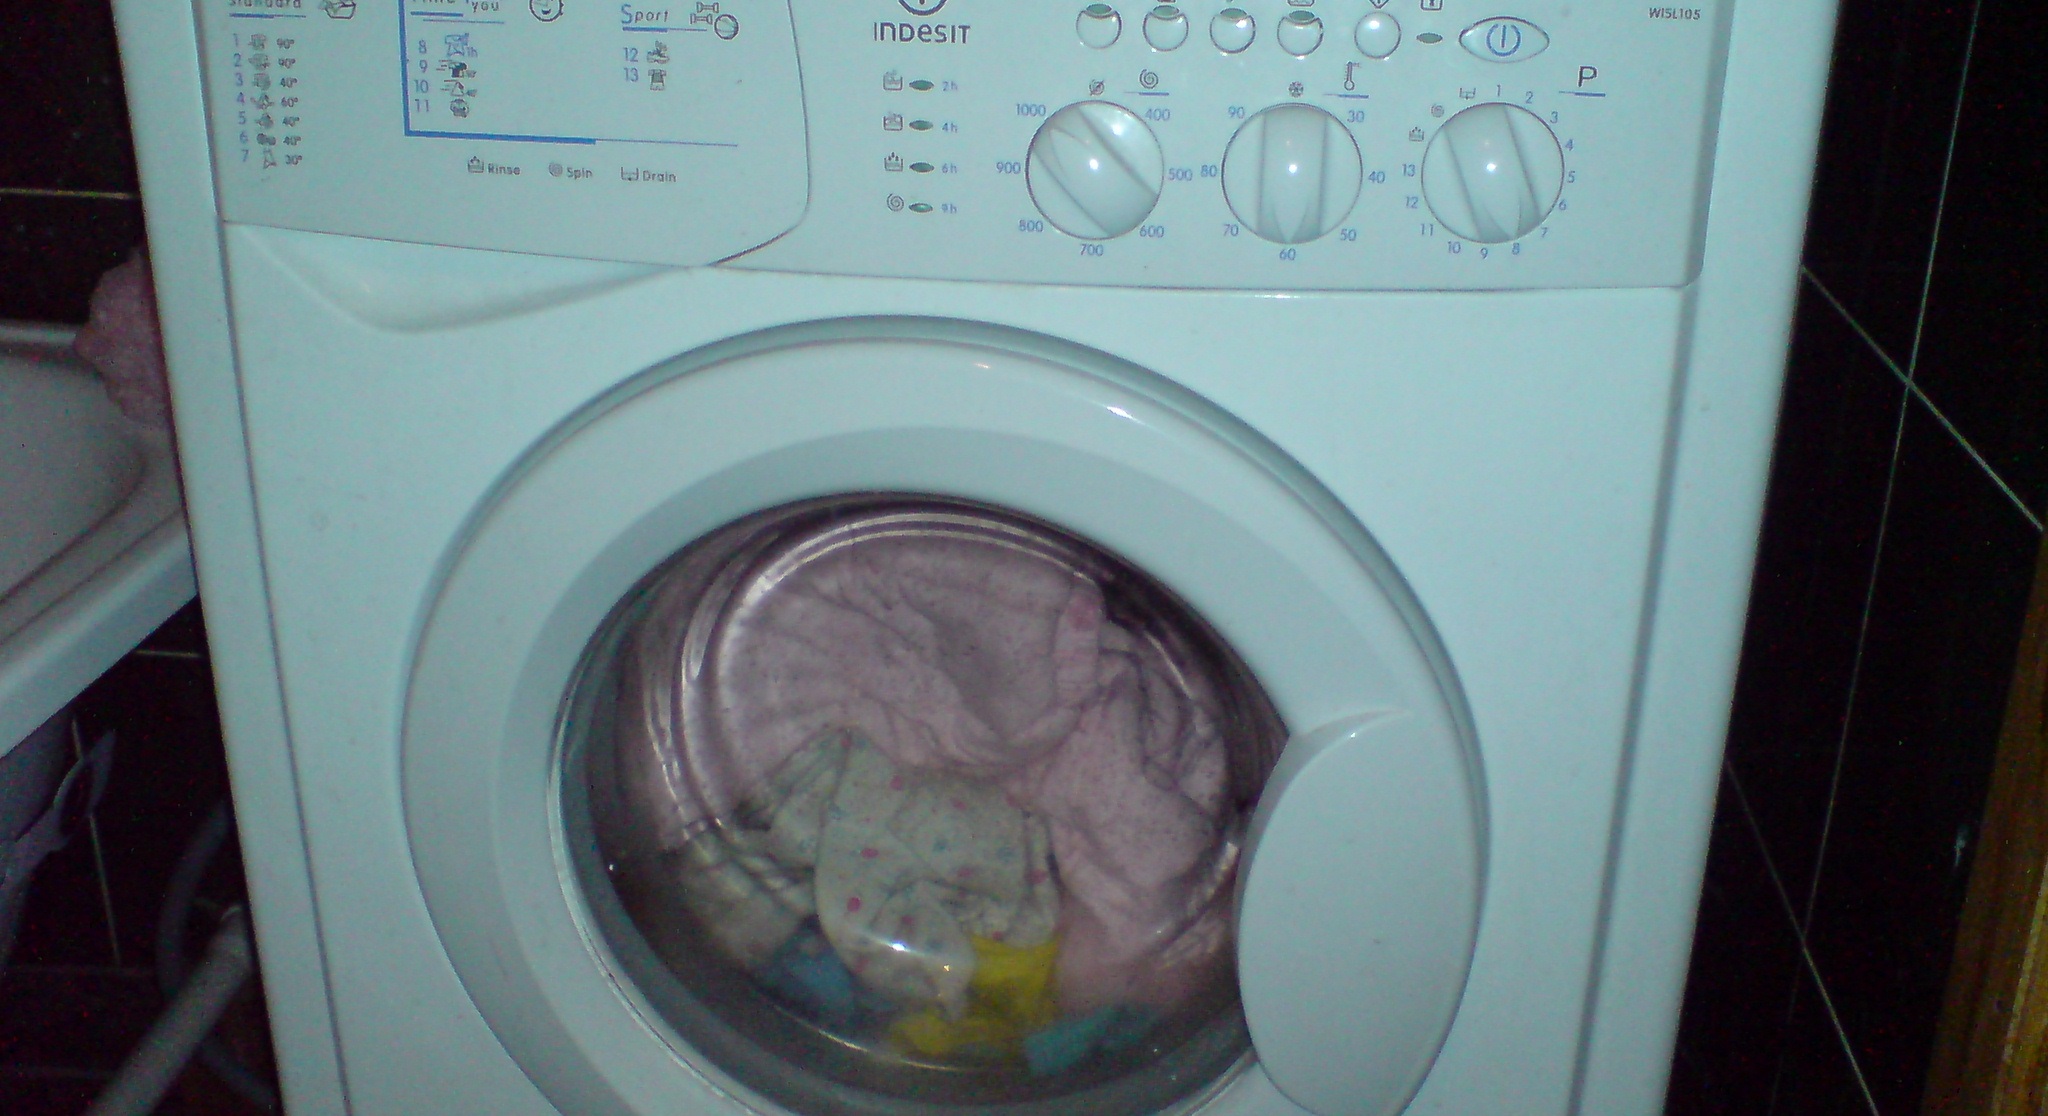 there is too much laundry in the washing machine